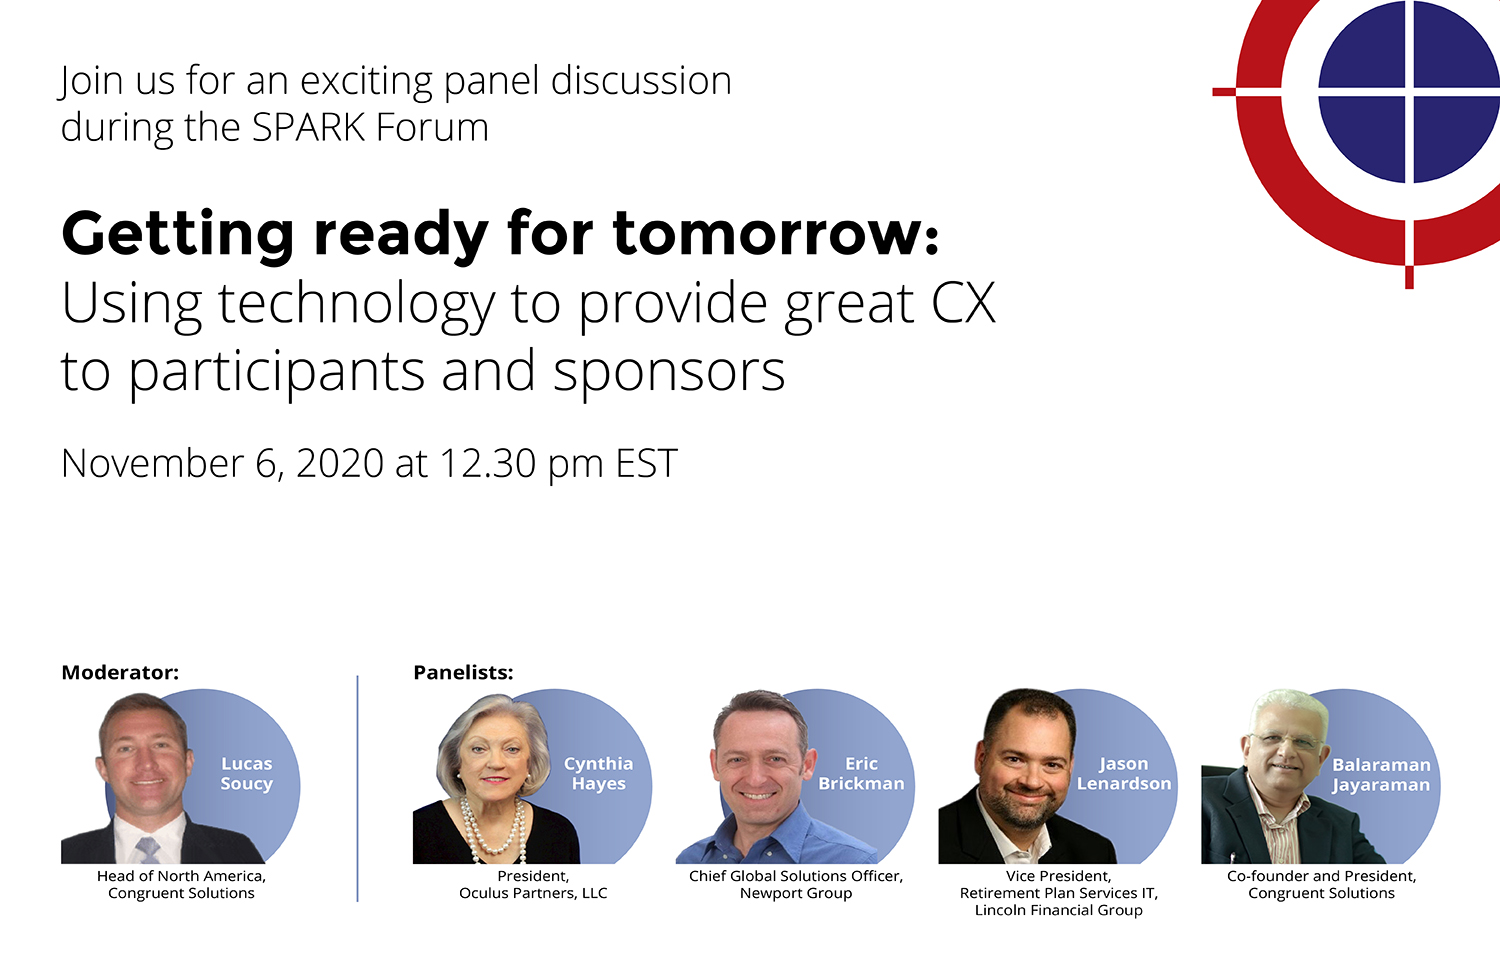 Using technology to provide great CX to participants and sponsors